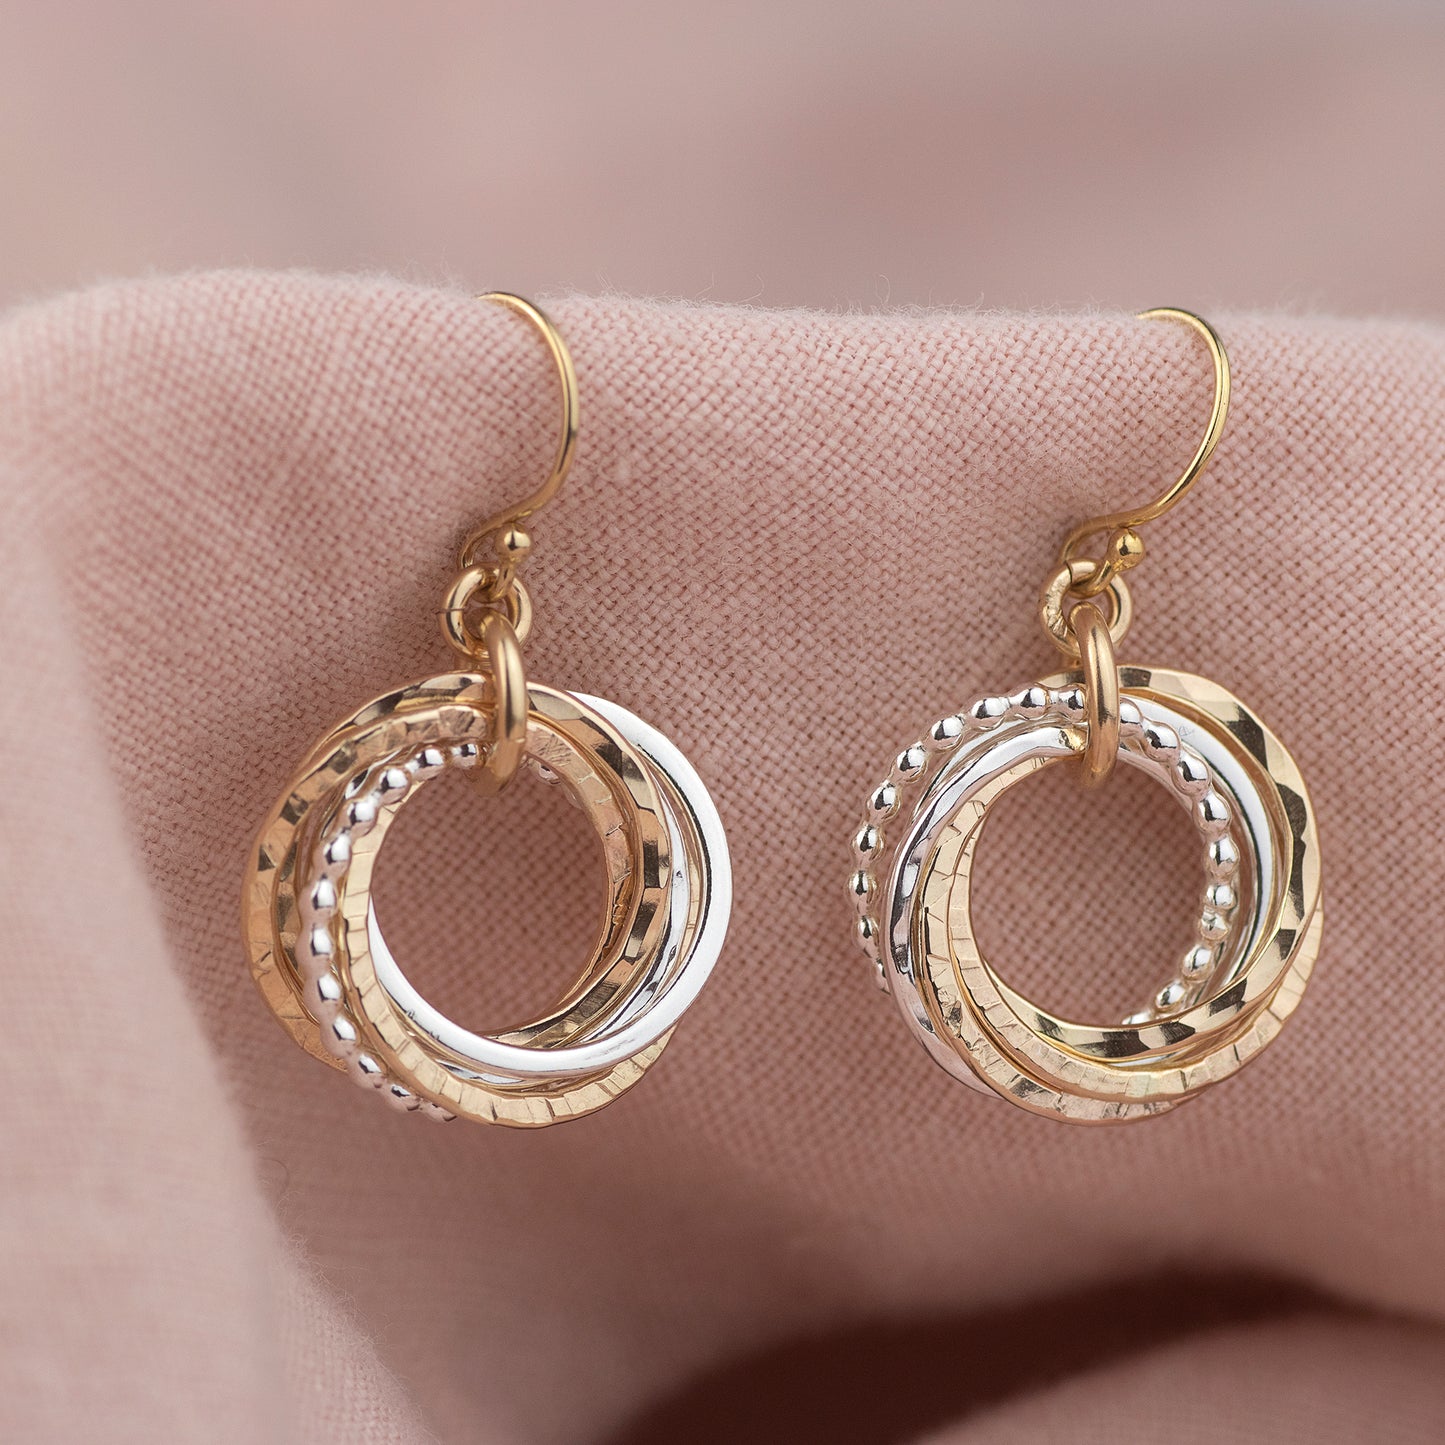 60th Birthday Earrings - The Original 6 Links for 6 Decades Earrings - Petite Silver & Gold